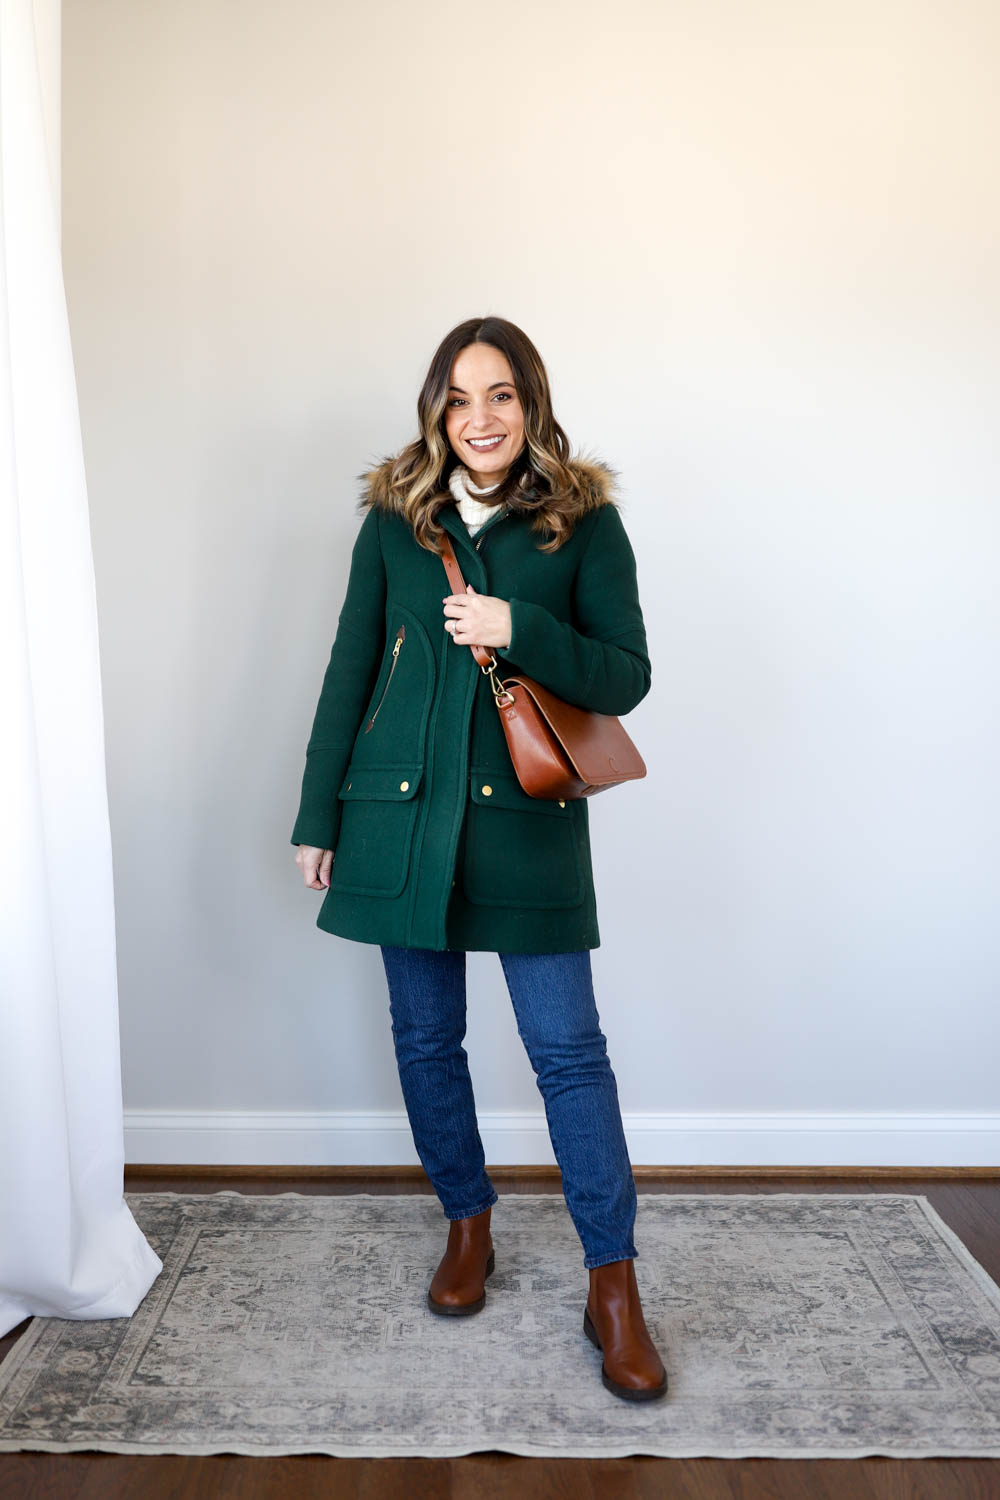 How to Wear Chelsea Boots with Jeans for Women - Straight A Style